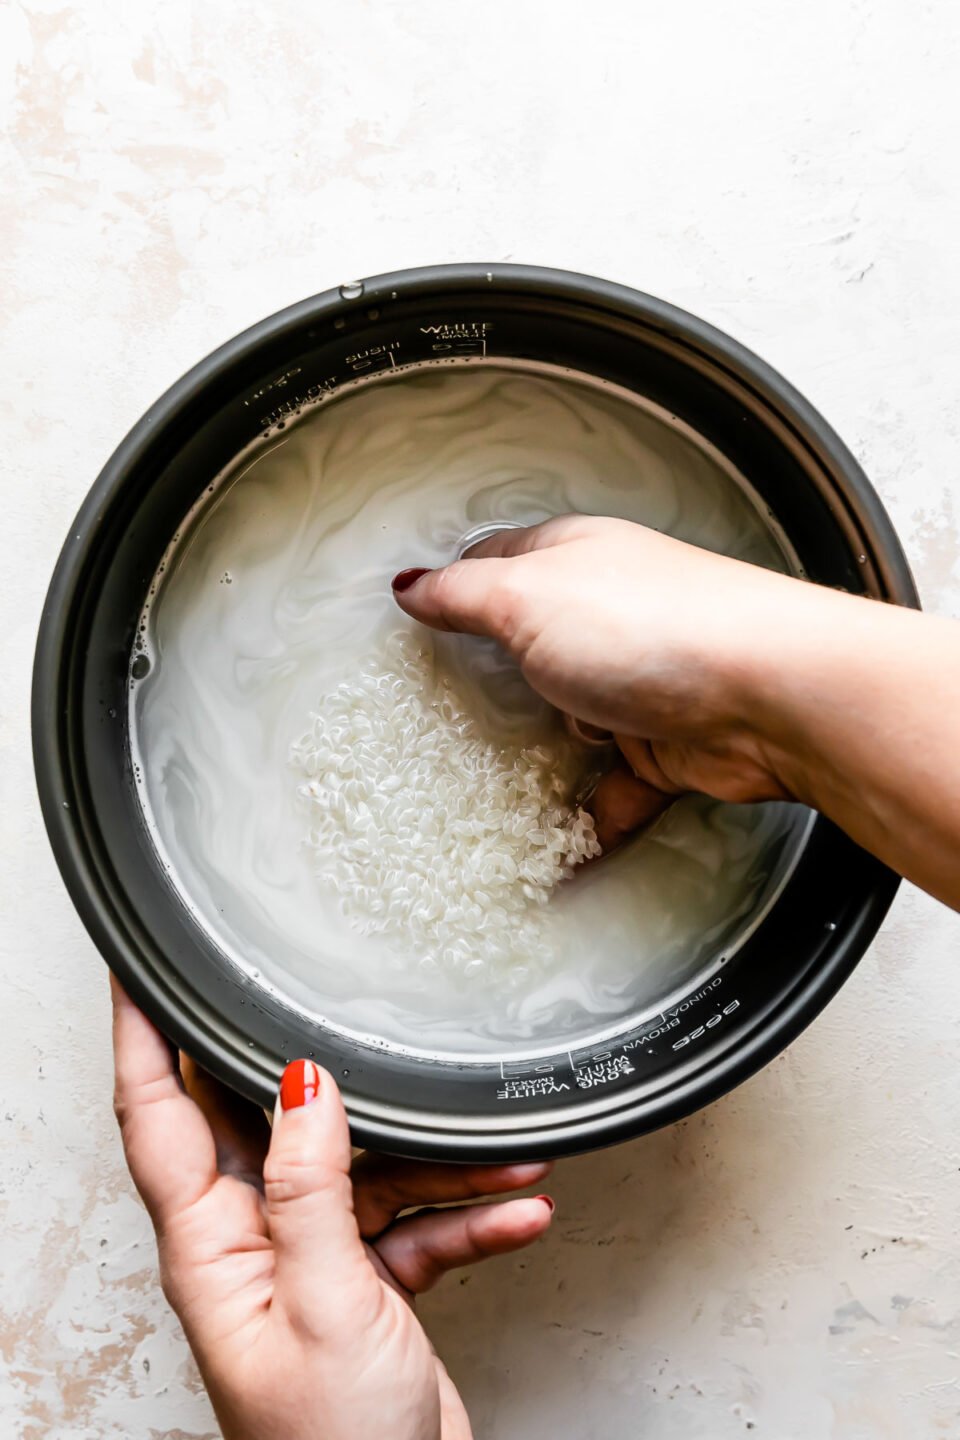 A woman's hand works to rinse white rice in water inside of the inner cooking pan of a Zojirushi rice cooker. The pan sits atop a creamy white textured surface.